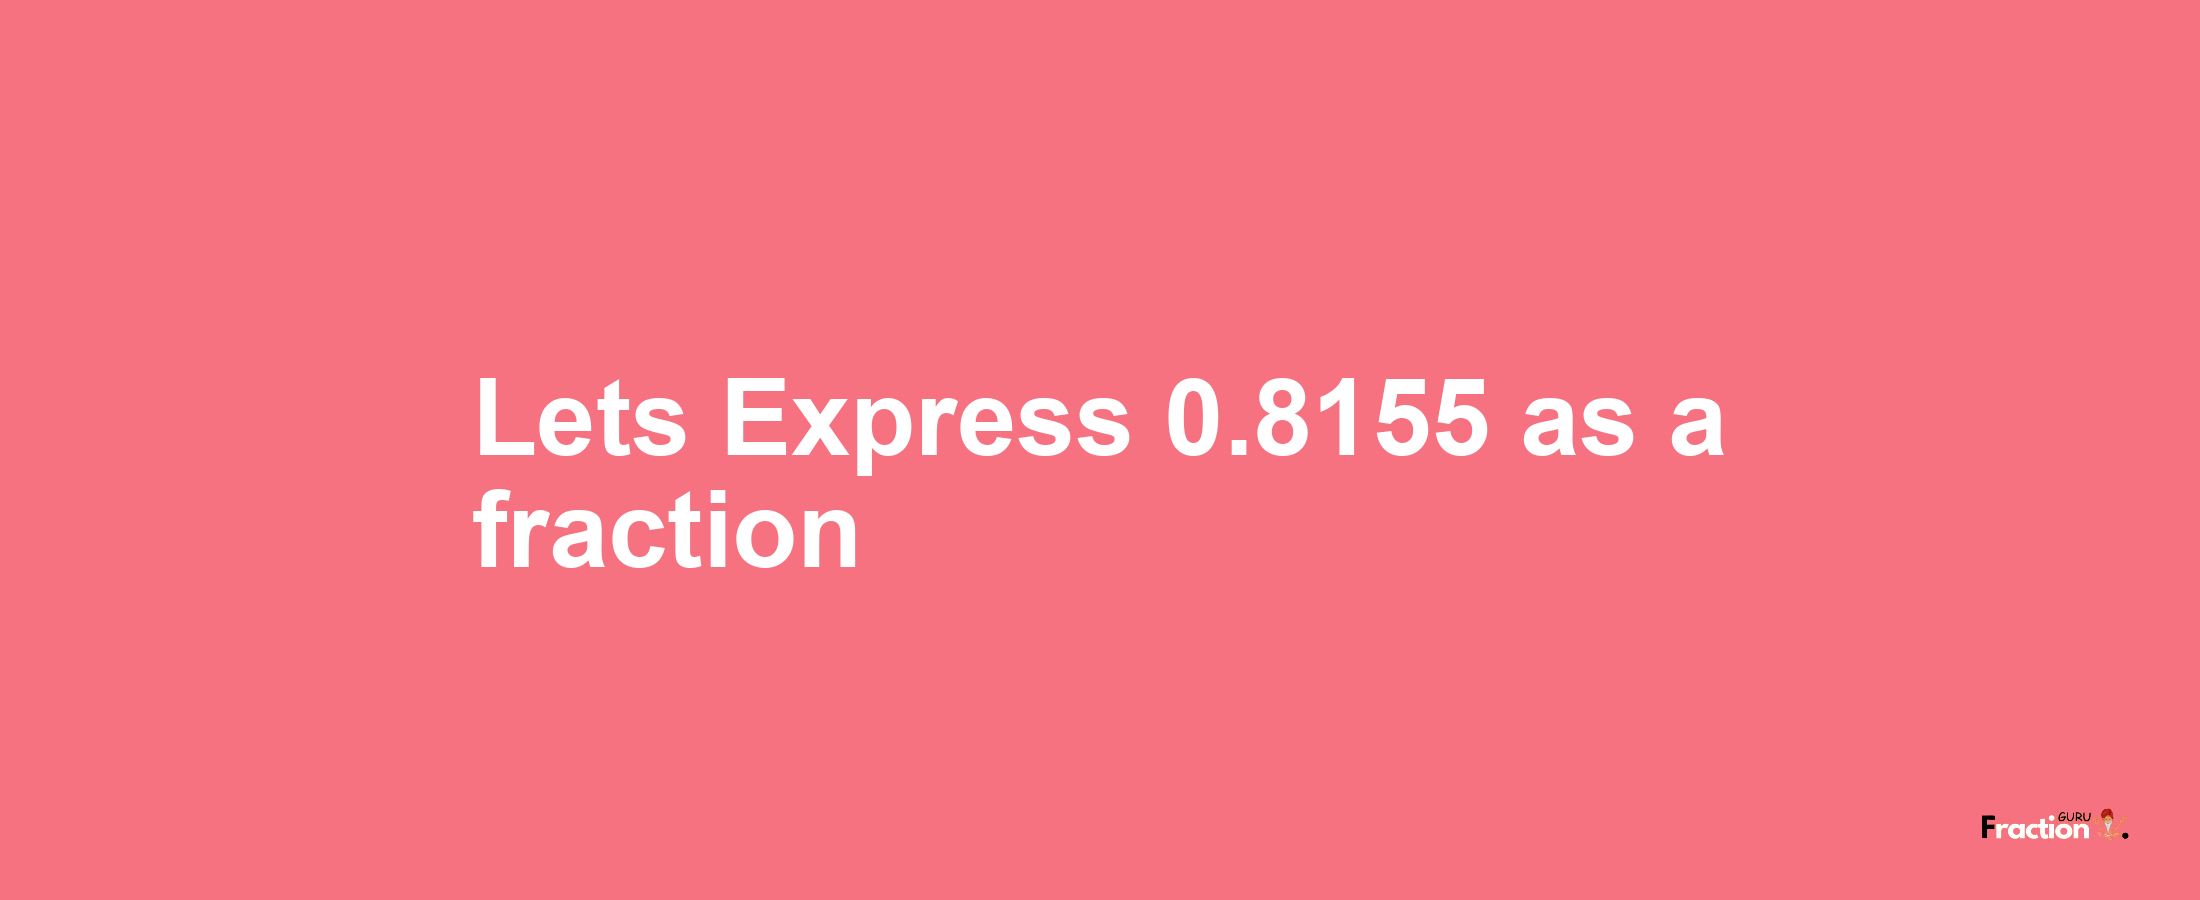 Lets Express 0.8155 as afraction